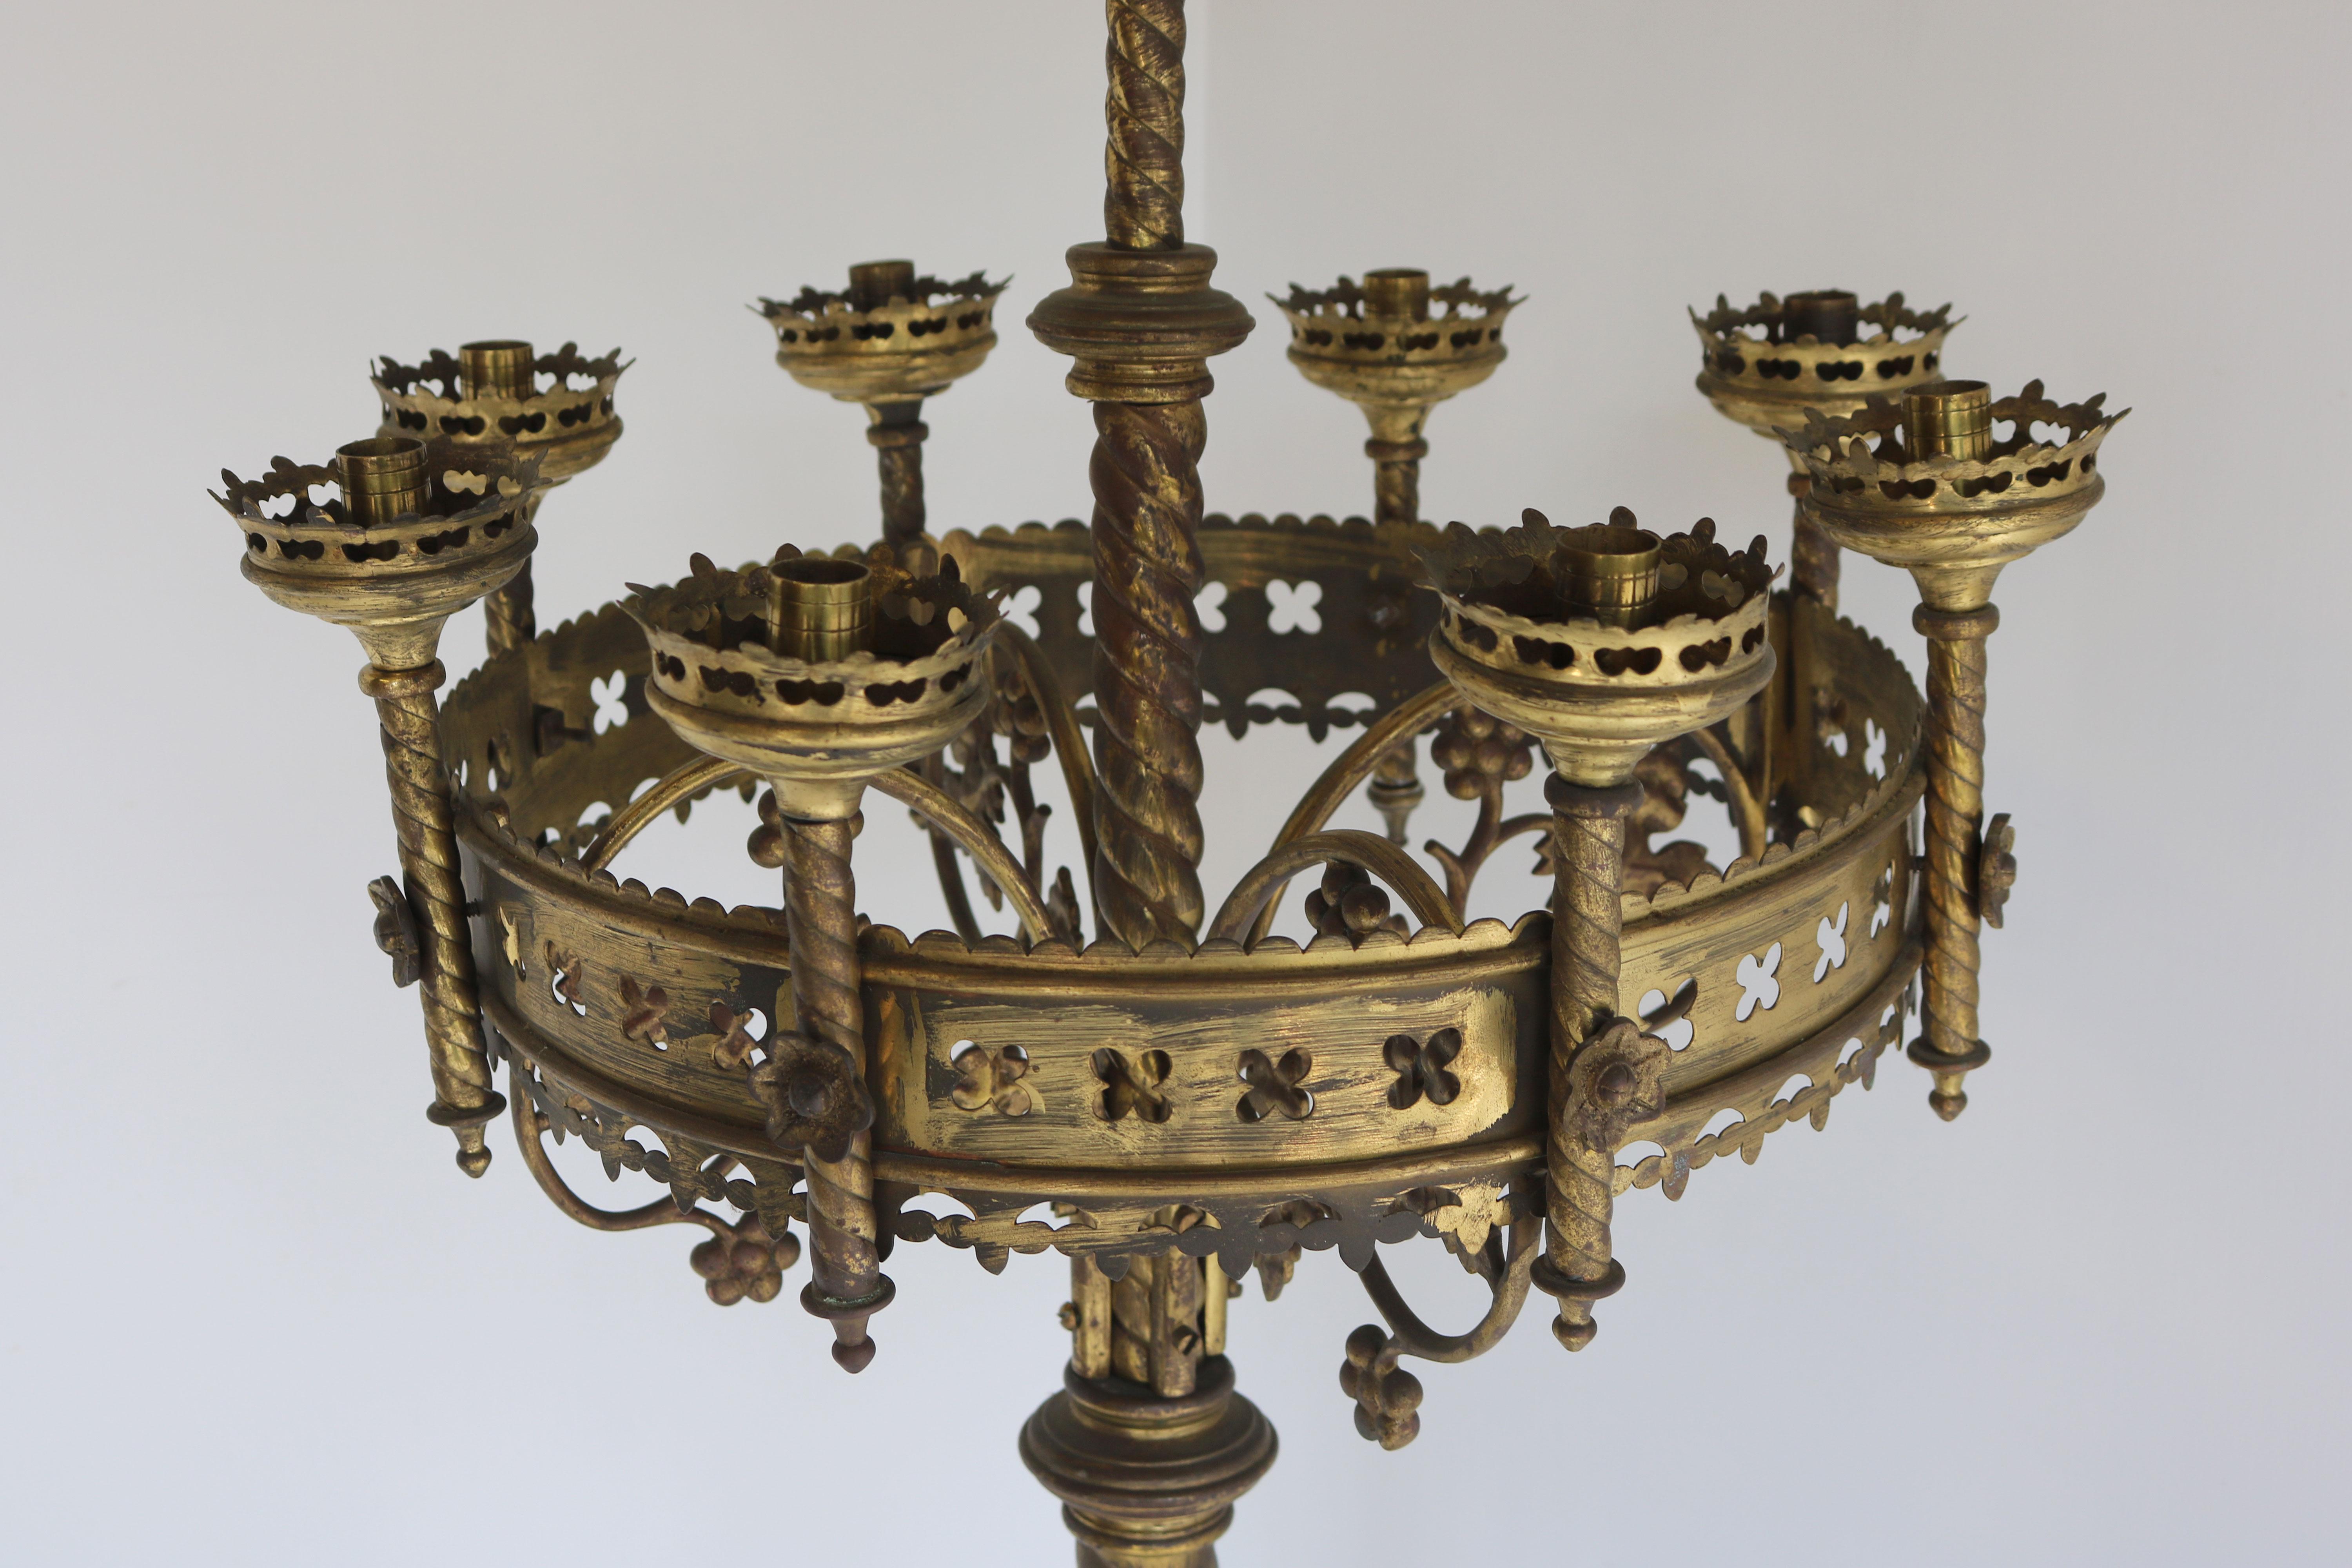 Large & impressive antique French Gothic Revival church candelabras for 13 candles. 
Amazing details with lions feet, many carved decorations & floral leaves. 
Made from brass & bronze with a gorgeous age patina. Very large model used in a French